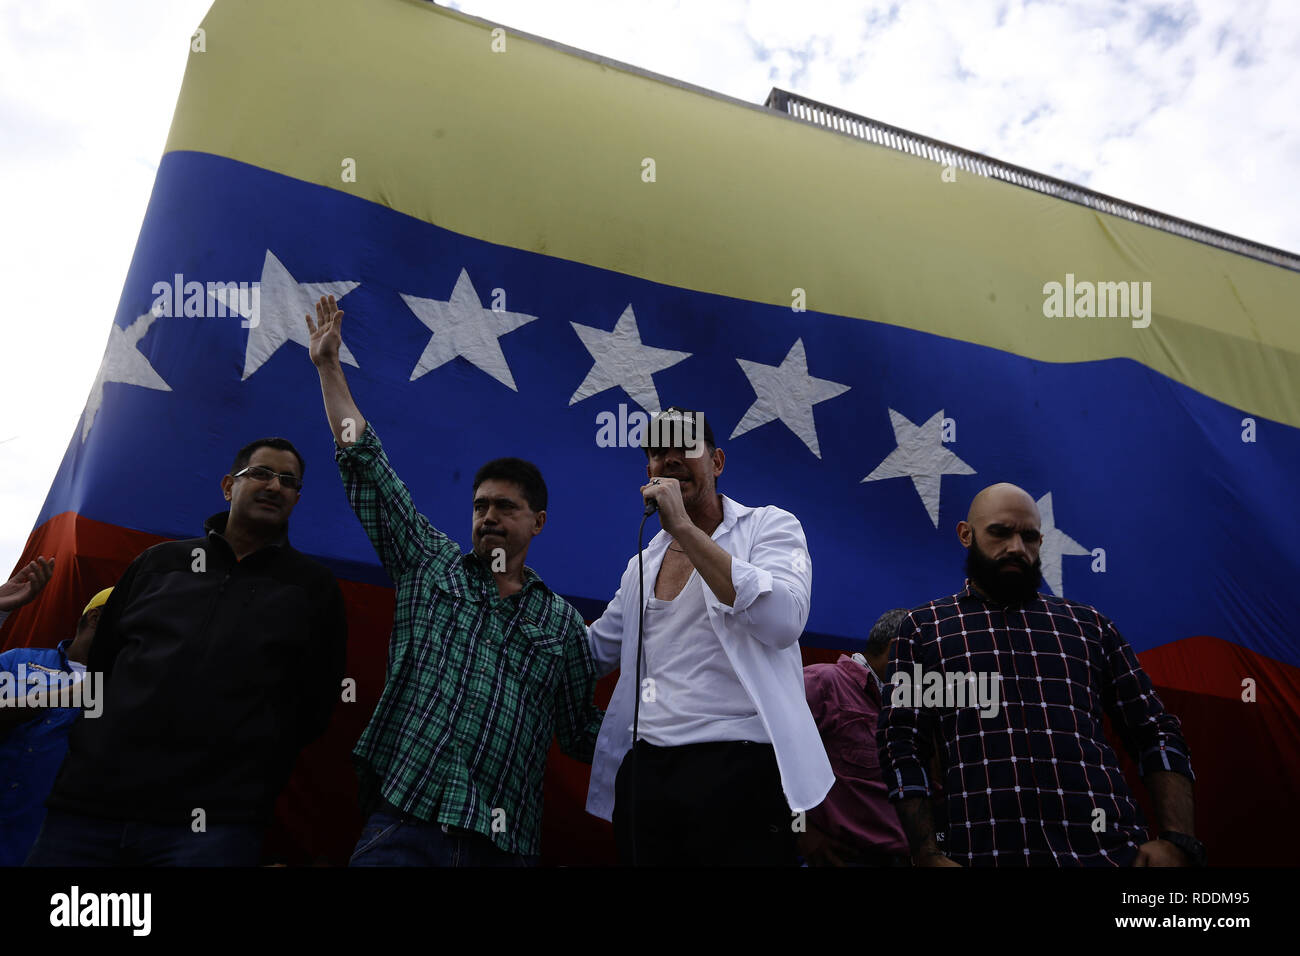 San Diego, Carabobo, Venezuela. 17th Jan, 2019. January 17, 2019. Carlos Lozano (center) Ilidio Abreu (2nd left, Angel Alvarez (left) Marcos Bozo (rigth) Deputies to the National Assembly for the state Carabobo speak in the ralization of open councils as a legal mechanism for popular consultation and obtain the support of the population for the departure of Nicolas Maduro, who is unknown as more than 60 countries as president of Venezuela. The photos correspond to the Don Julio Centeno aveneu, in the municipality San Diego, Carabobo state. Photo: Juan Carlos Hernandez (Credit Image: © Ju Stock Photo